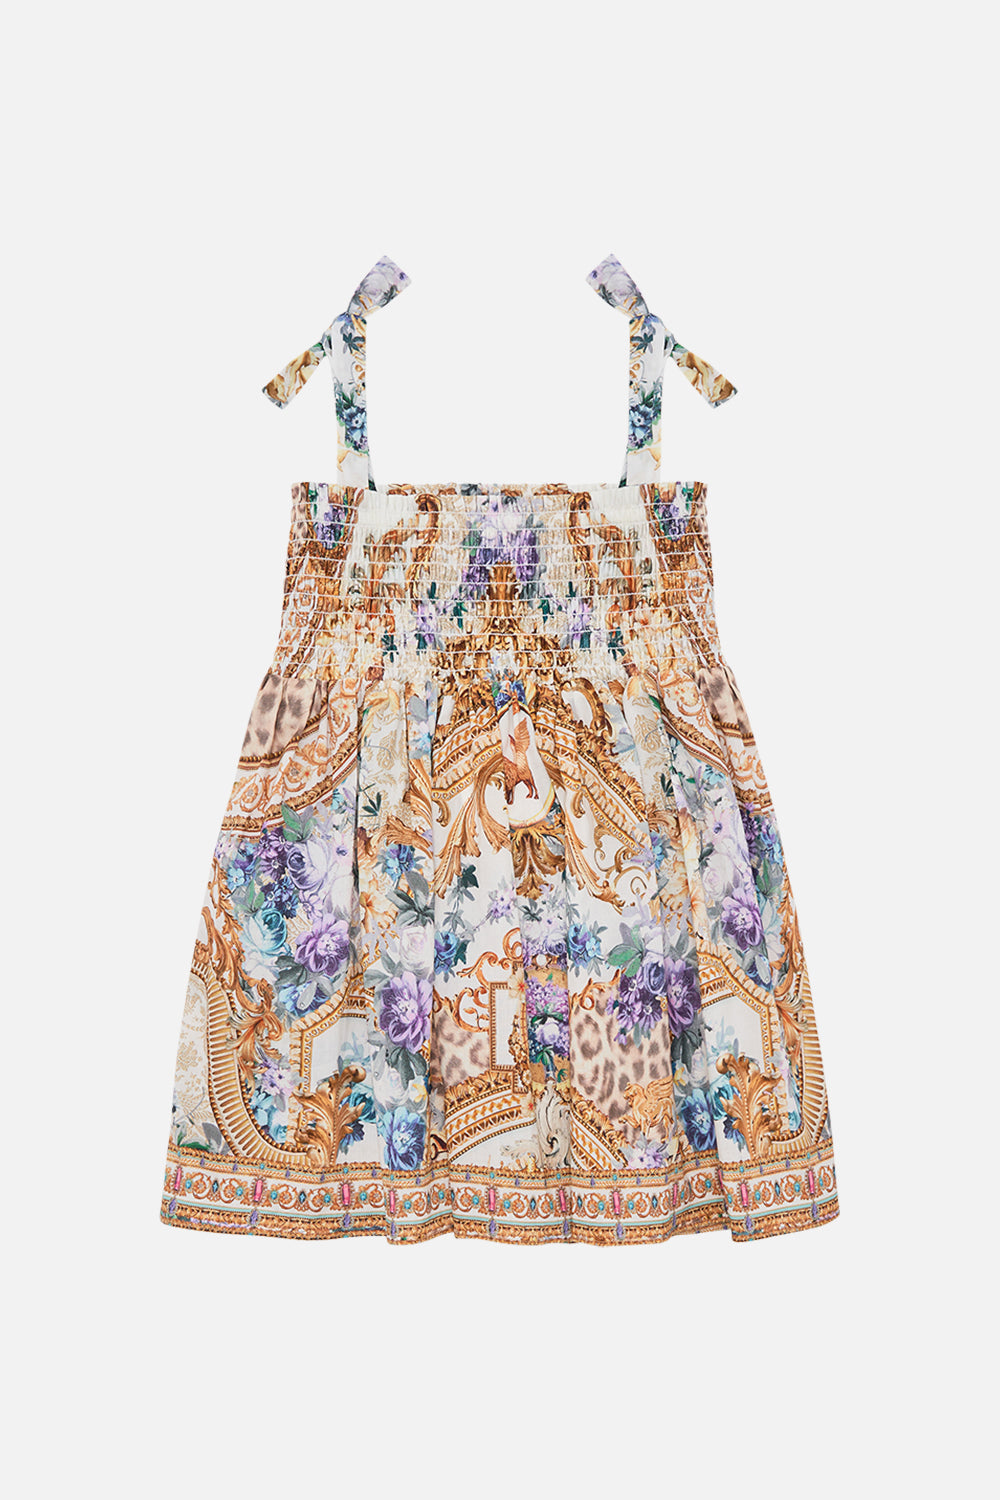 Product view of Milla By CAMILLA babies dress in Palazzo Play Date print